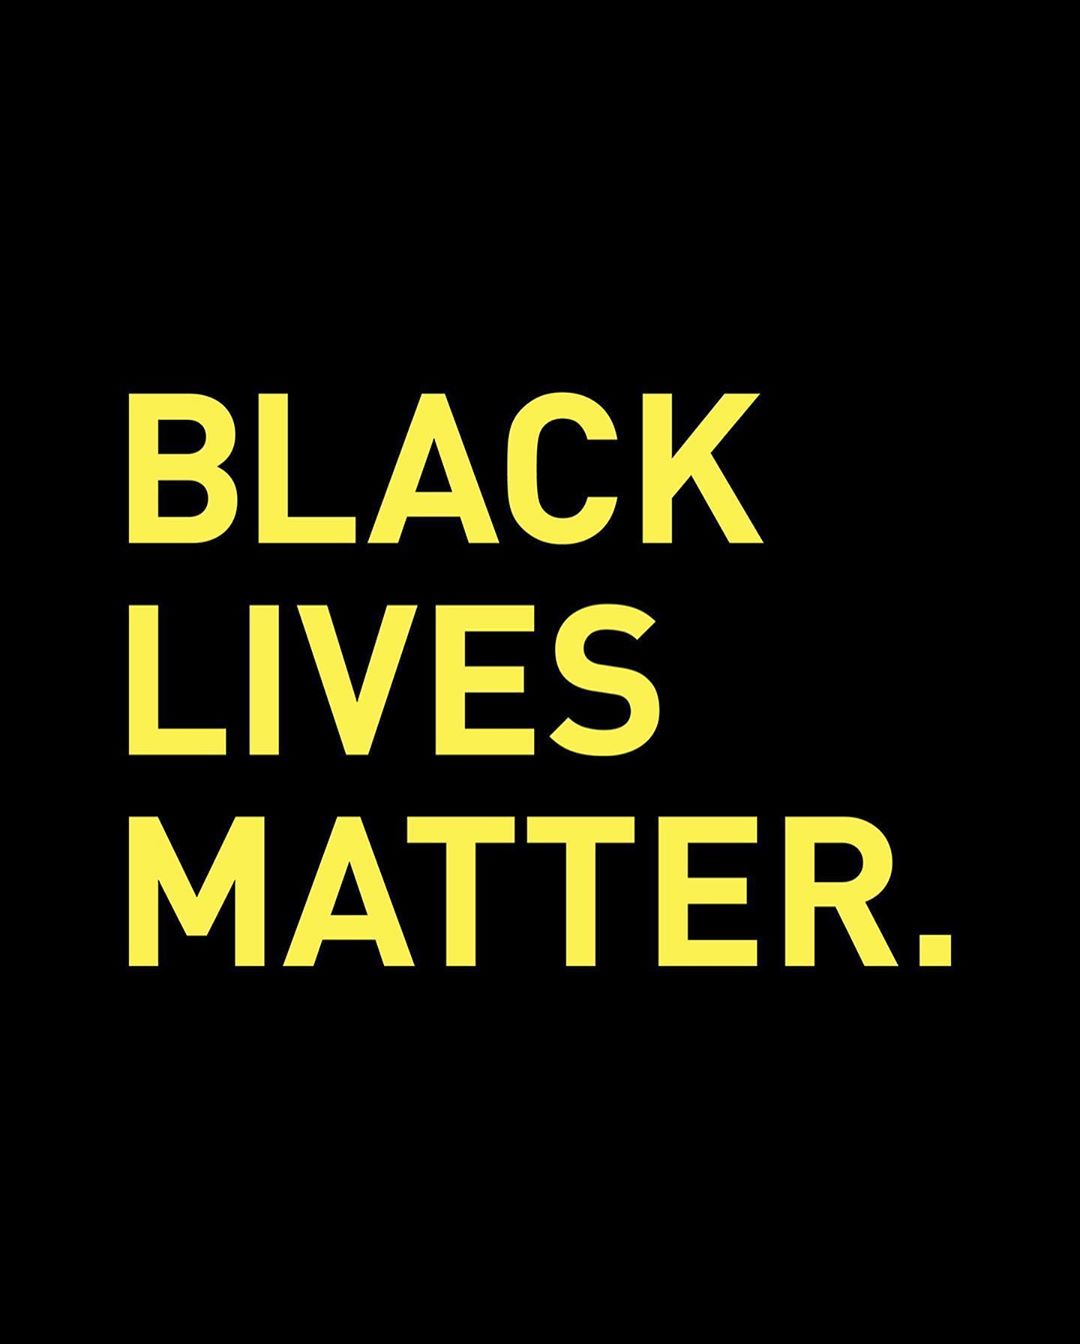 adidas - This is our commitment to the Black community, and the world. We can change, and we will. This is just the start.